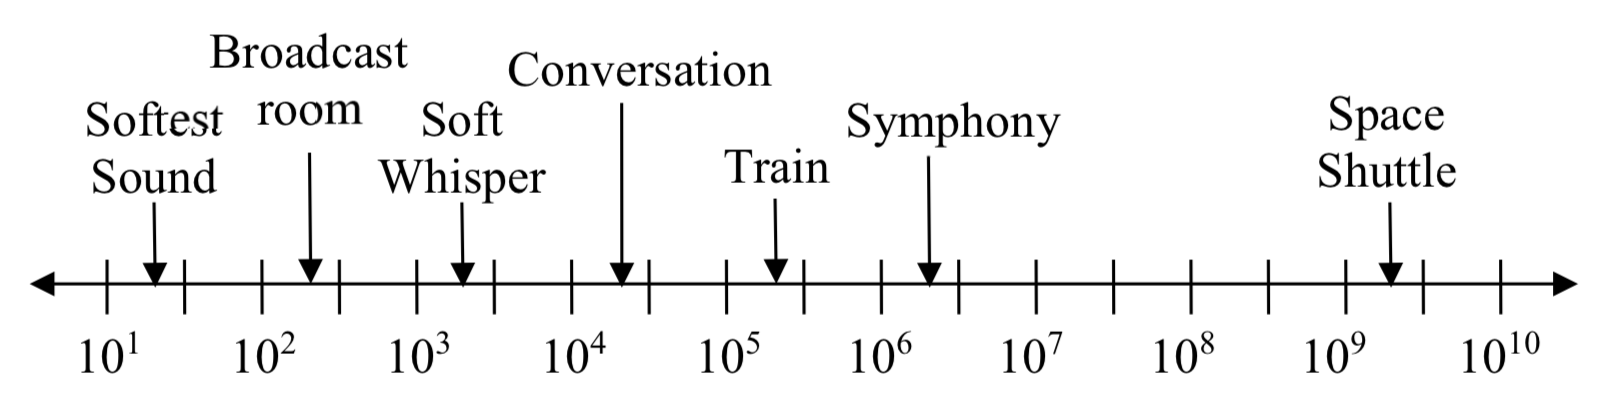 A numberline with equally spaced ticks labeled 10 to the 1, 10 to the 2, and so on up to 10 to the 10.  There are arrows for Softest sound around 10 to the 1.3, Broadcast room around 10 to the 2.3, Soft whisper at 10 to the 3.3, Conversation at 10 to the 4.3, Train at 10 to the 5.3, Symphony at 10 to the 6.3, and Space shuttle at 10 to the 9.3.